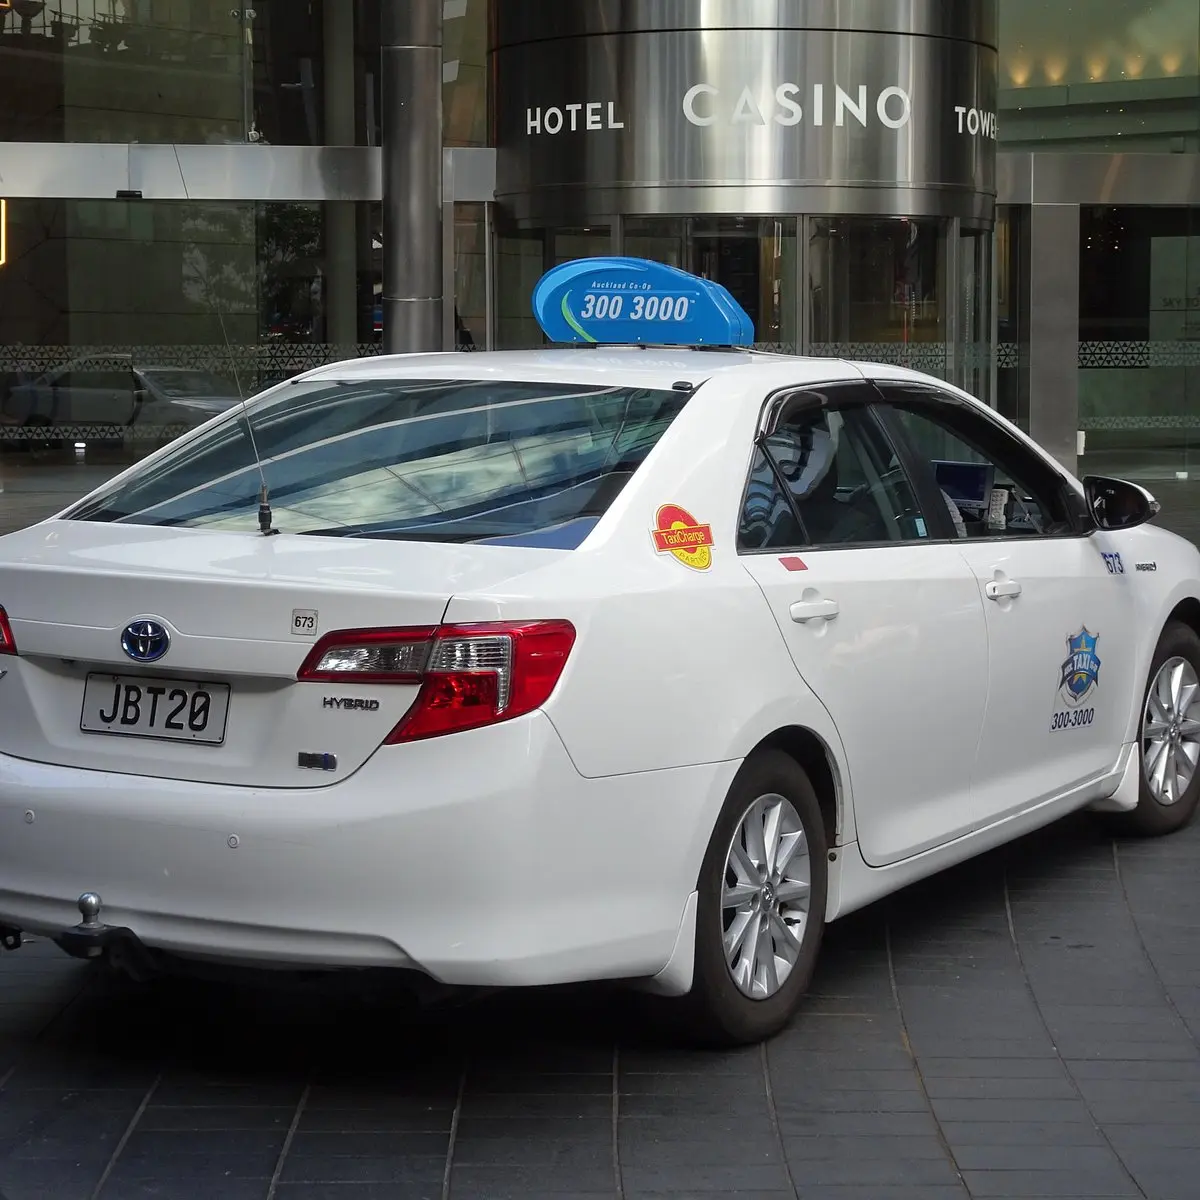 taxi auckland airport - How do I get from Auckland Airport to the city